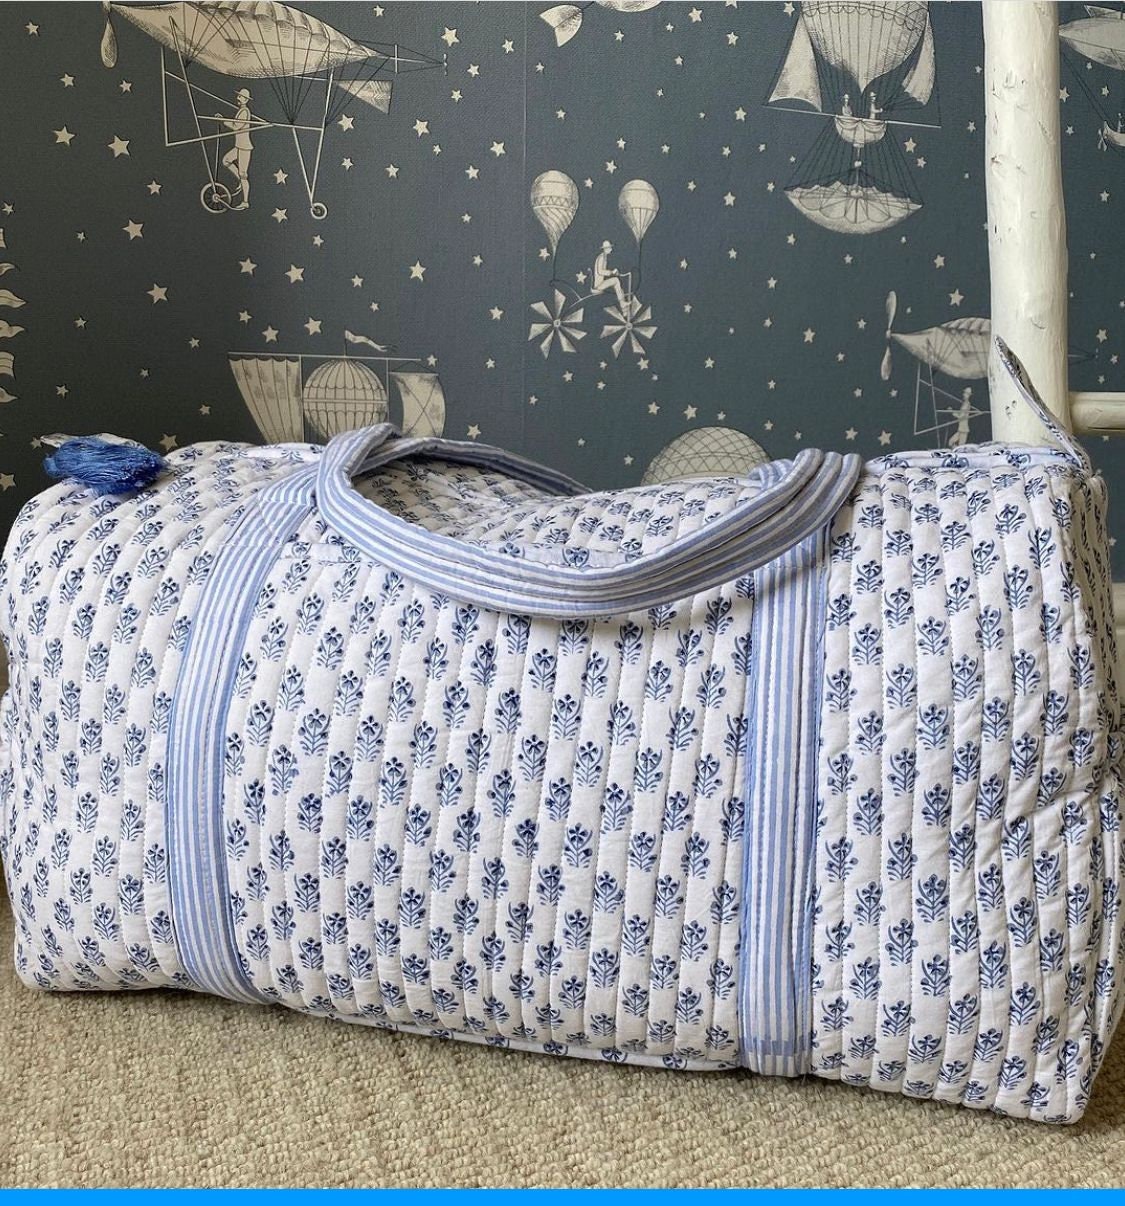 Handmade Quilted Terry Cloth Makeup Bag Light Blue Terry Bag Cosmetic Bag,  Toiletry Bag, Make up Bag, Terry Towel Bag, Gifts for Her 